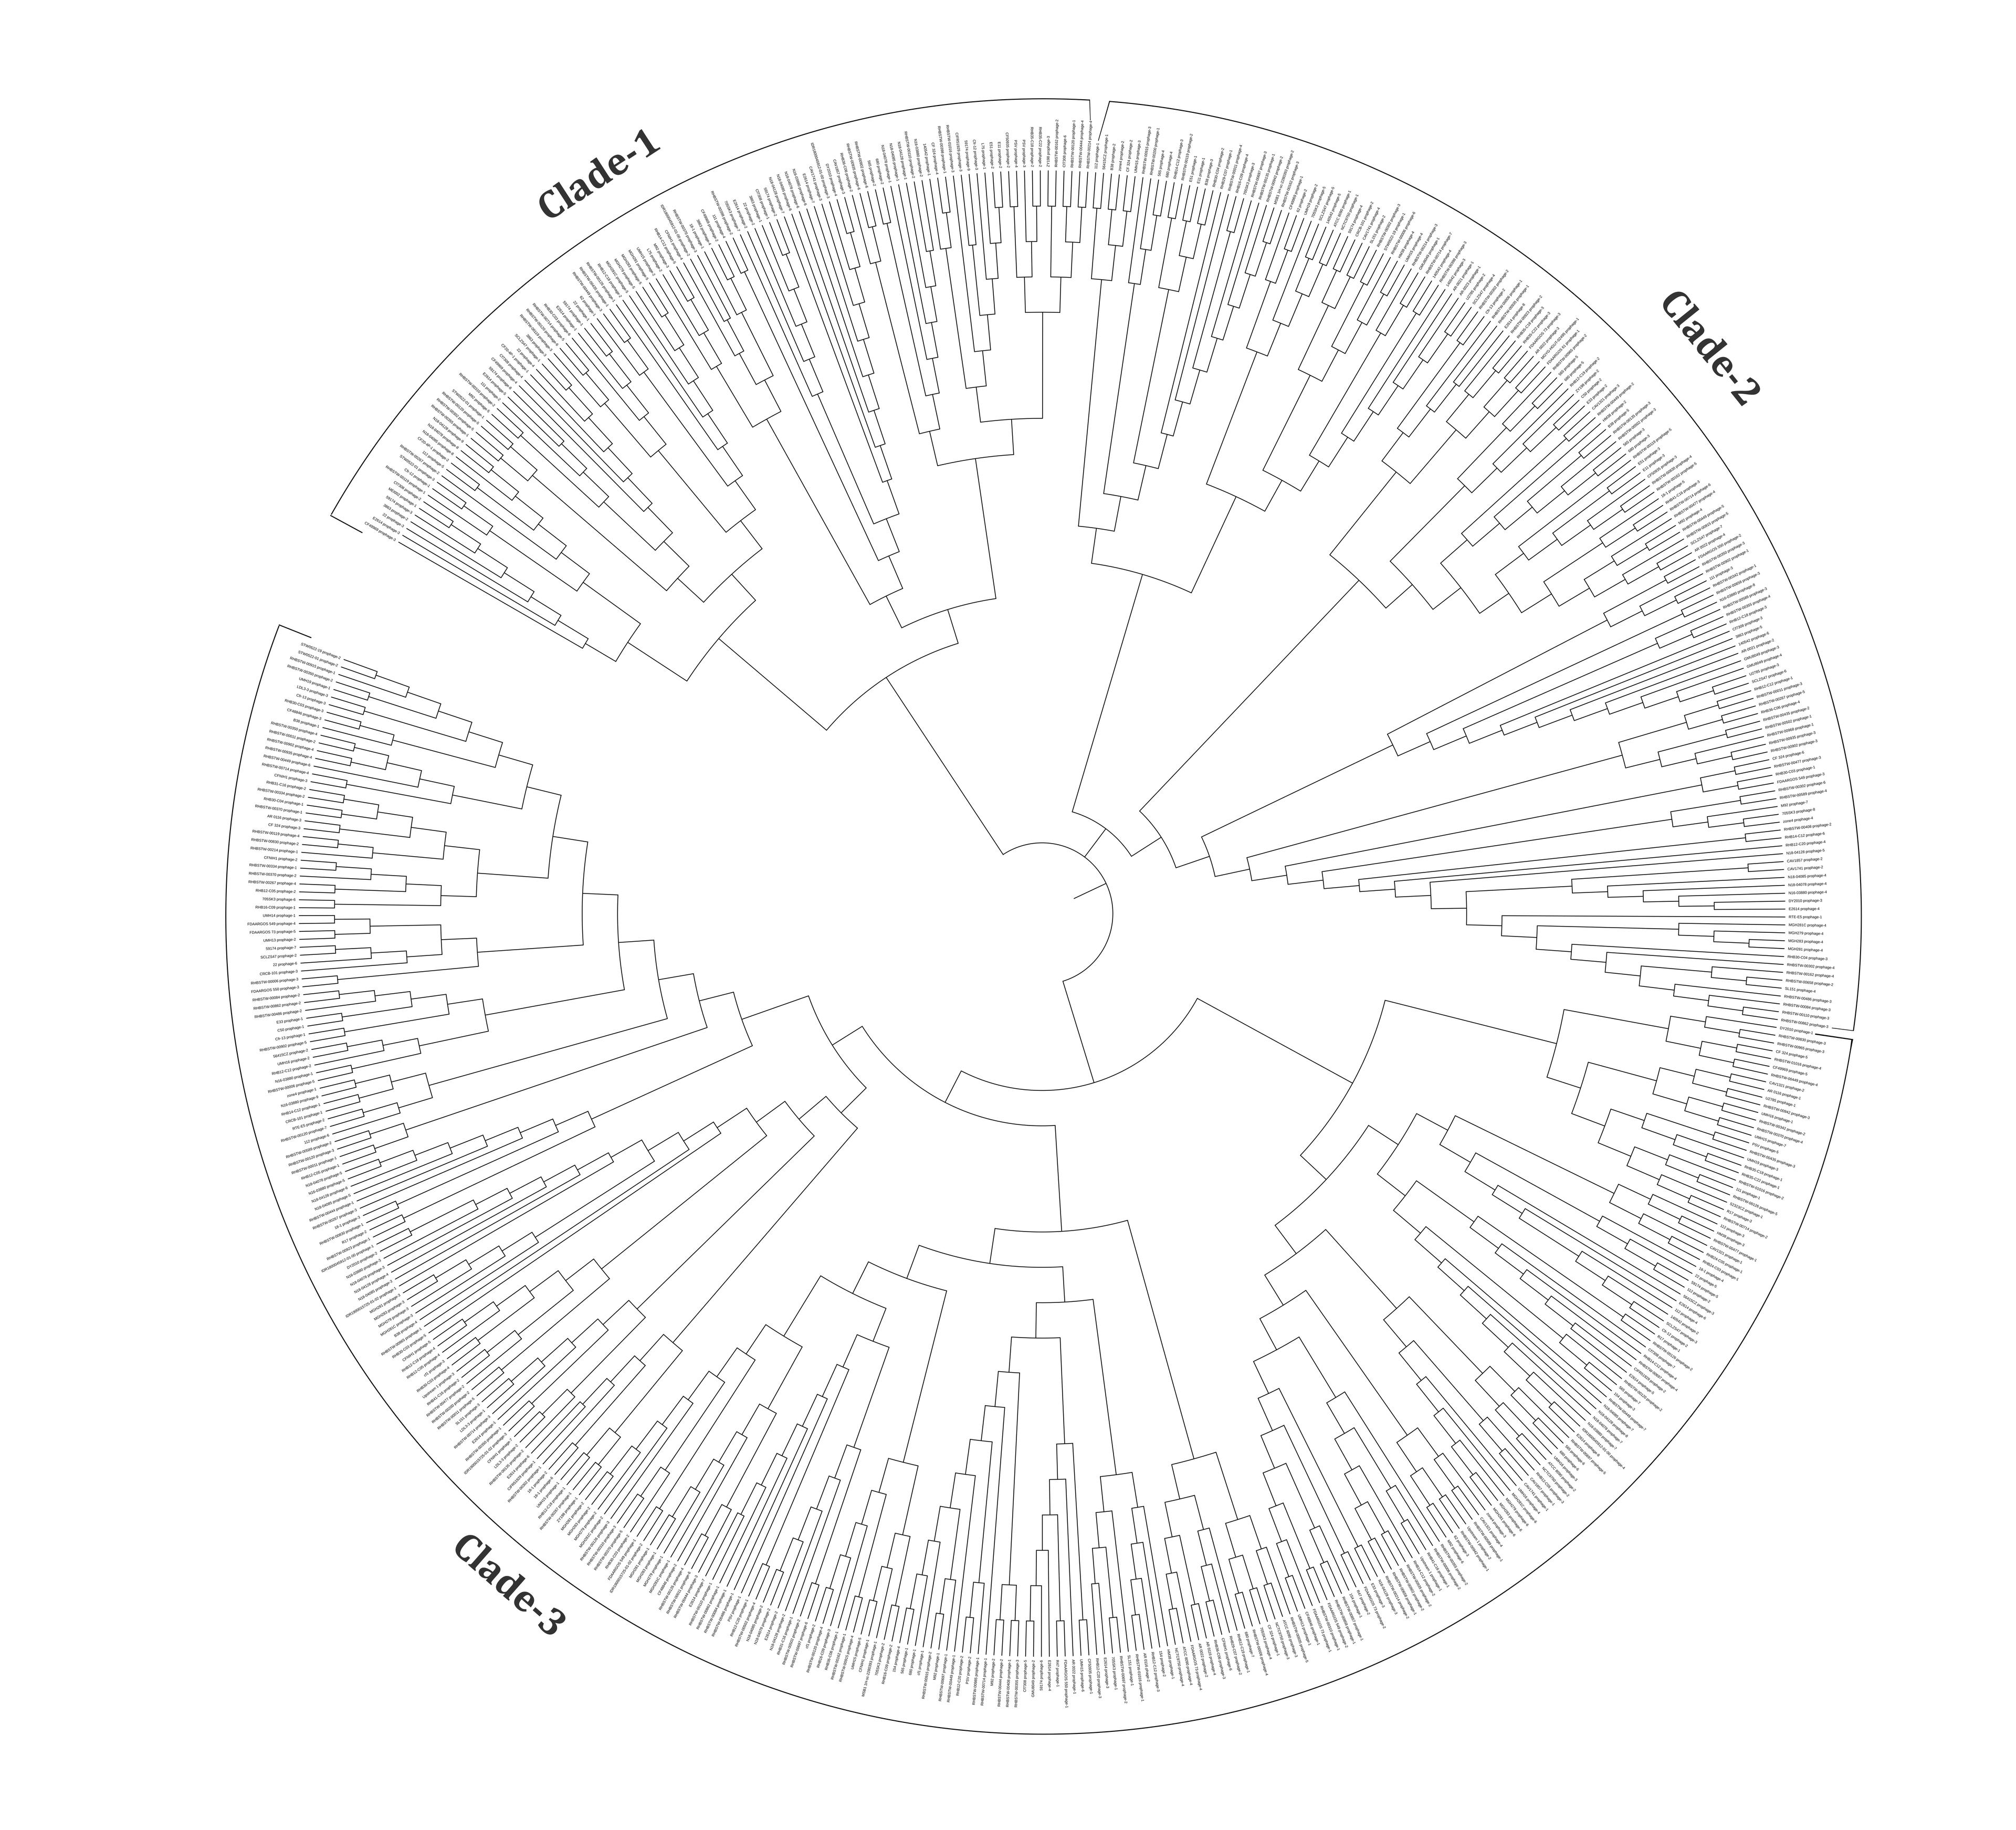 Genomic identification and characterization of prophages associated with Citrobacter freundii strains